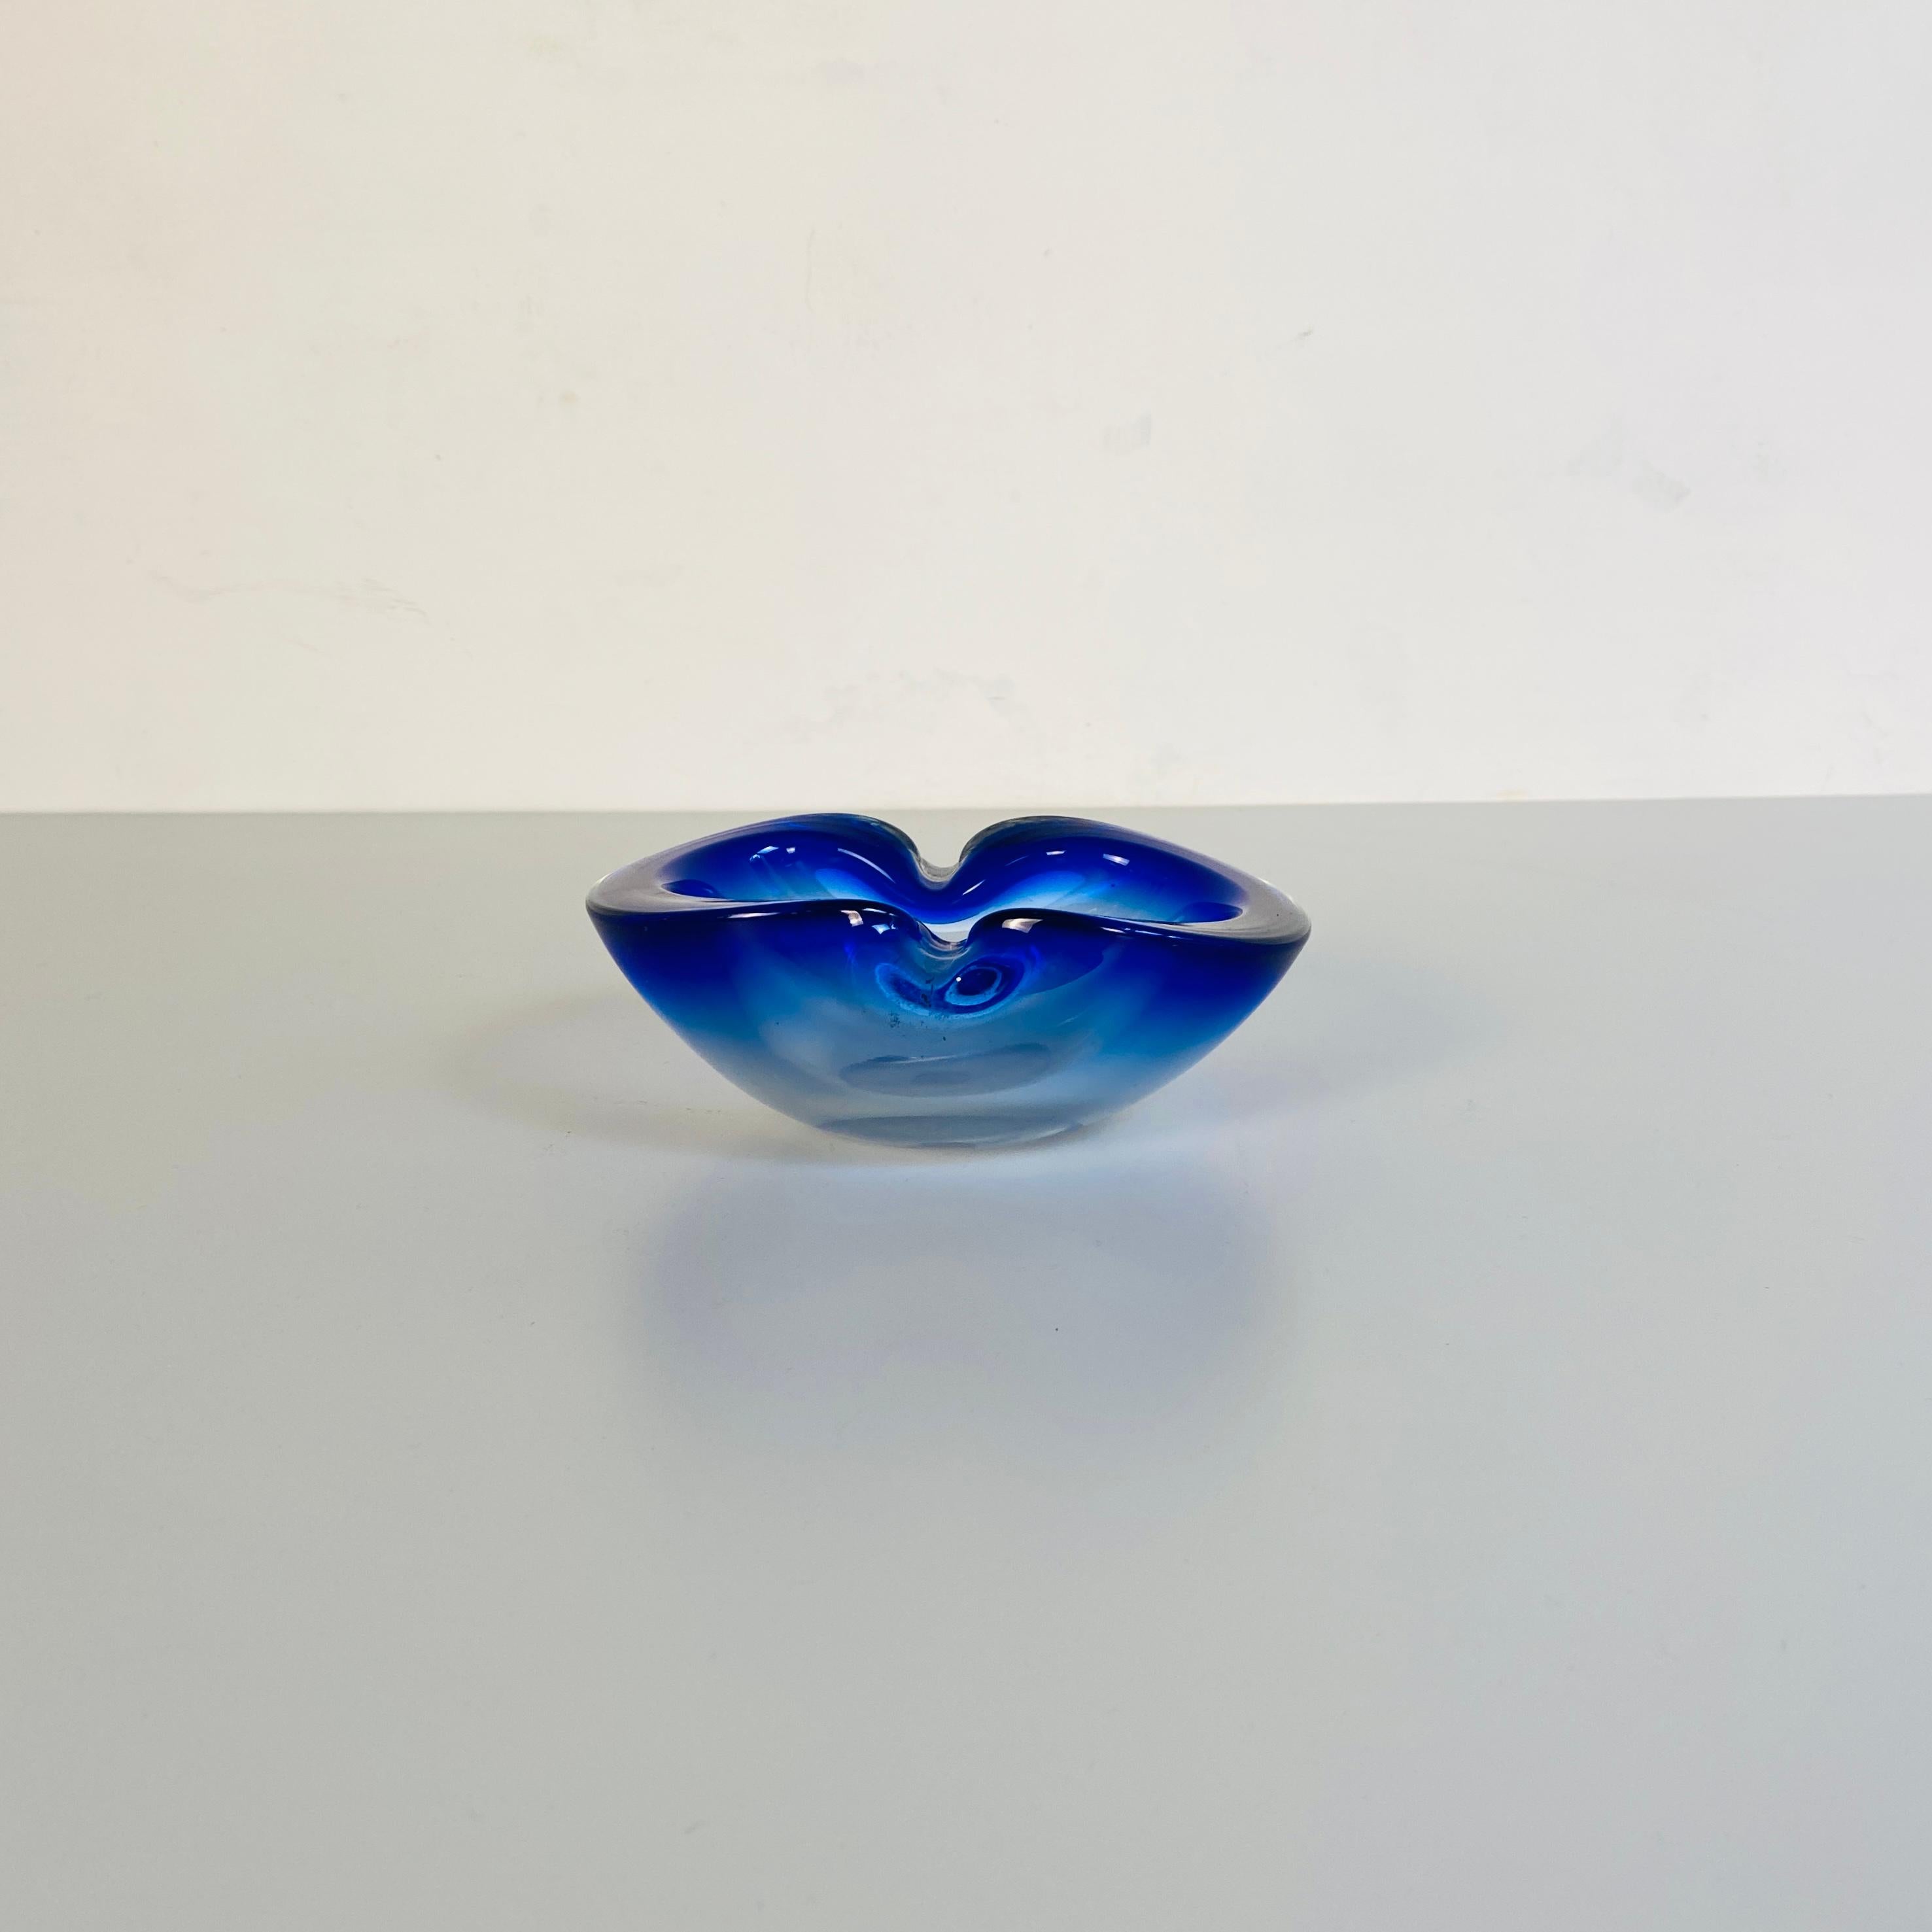 Italian Mid-Century Modern Murano Glass Oval Object Holder in Blue, 1970s For Sale 4